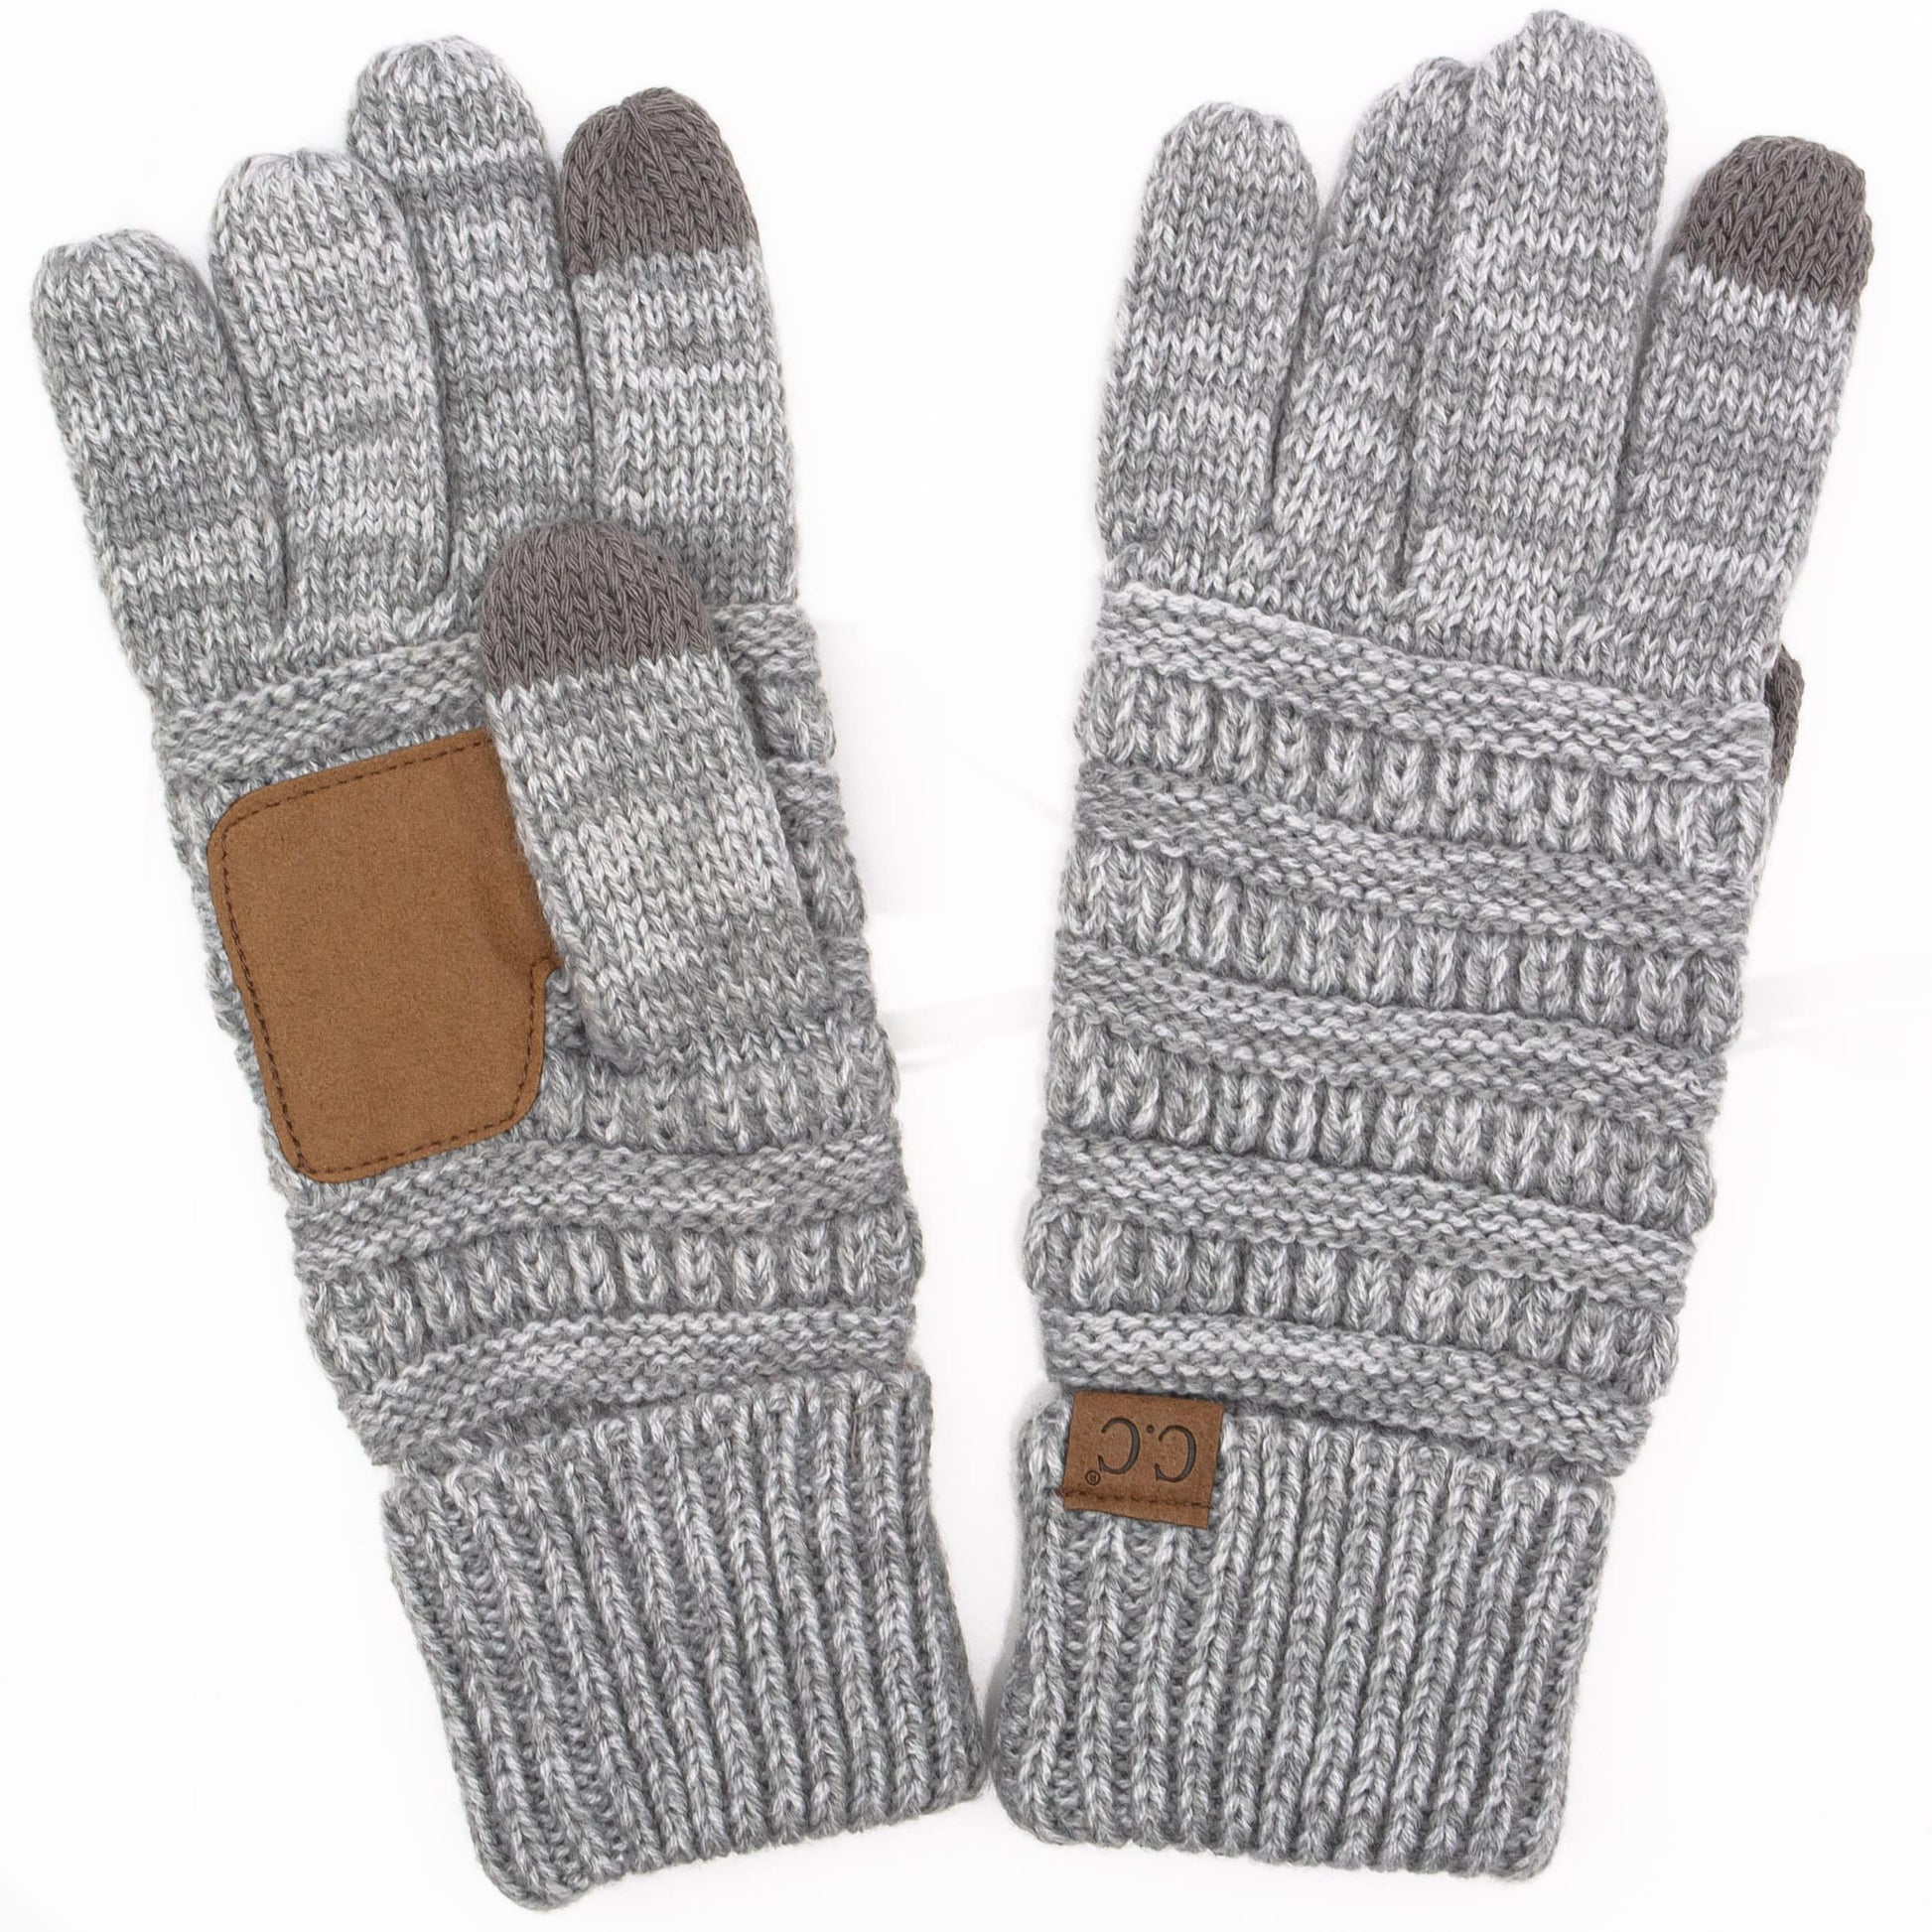 C.C Apparel Two Tone Grey C.C Unisex Cable Knit Winter Warm Anti-Slip Two-Toned Touchscreen Texting Gloves